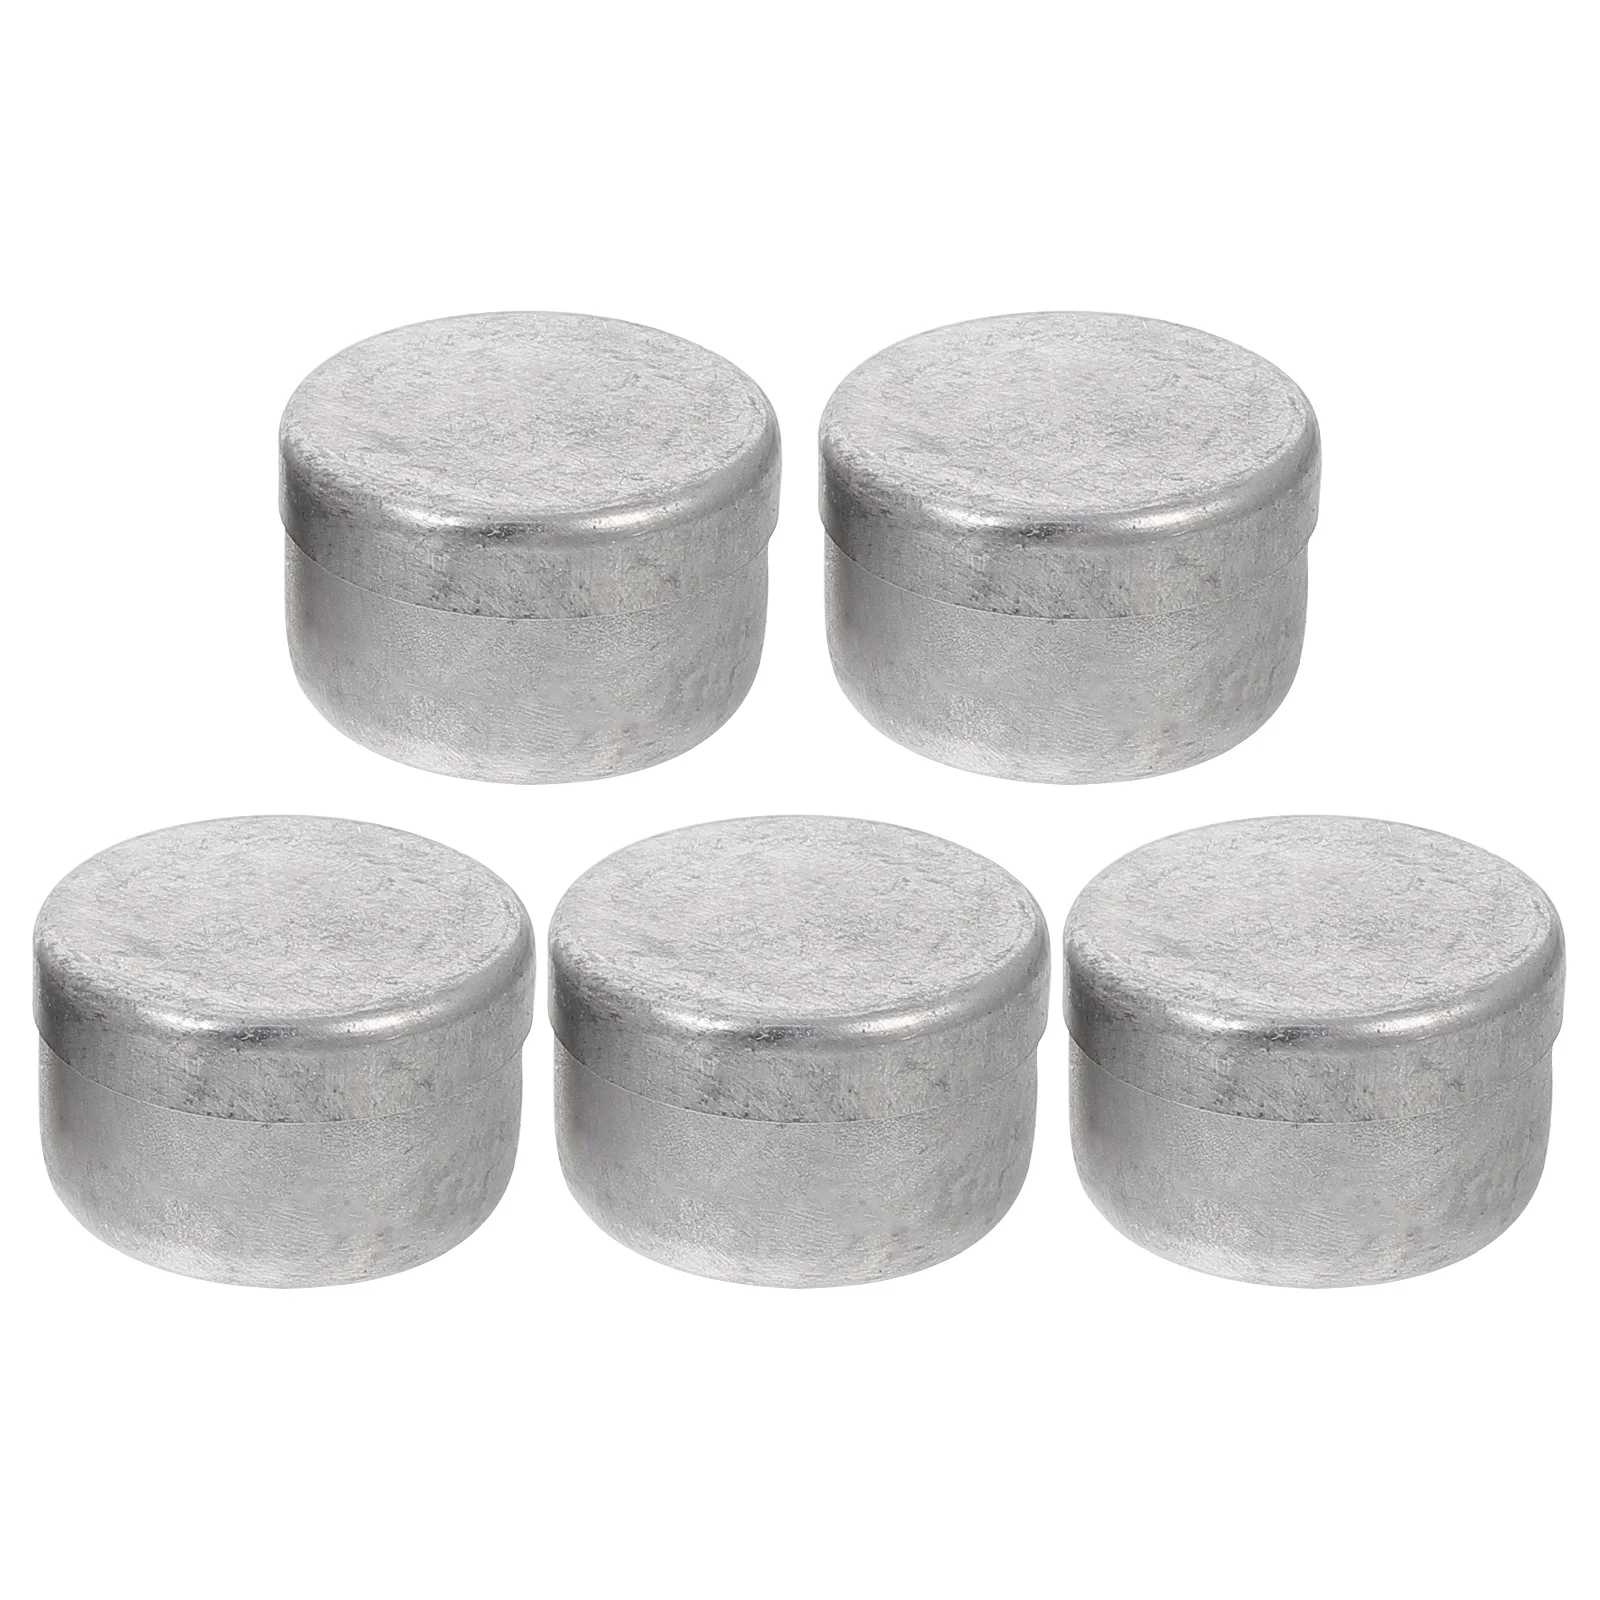 

5 Pcs Metal Container with Lid Aluminum Weighing Pan Sampling Dish Experiment Dishes Labs Holder Tool Soil Can Instrument